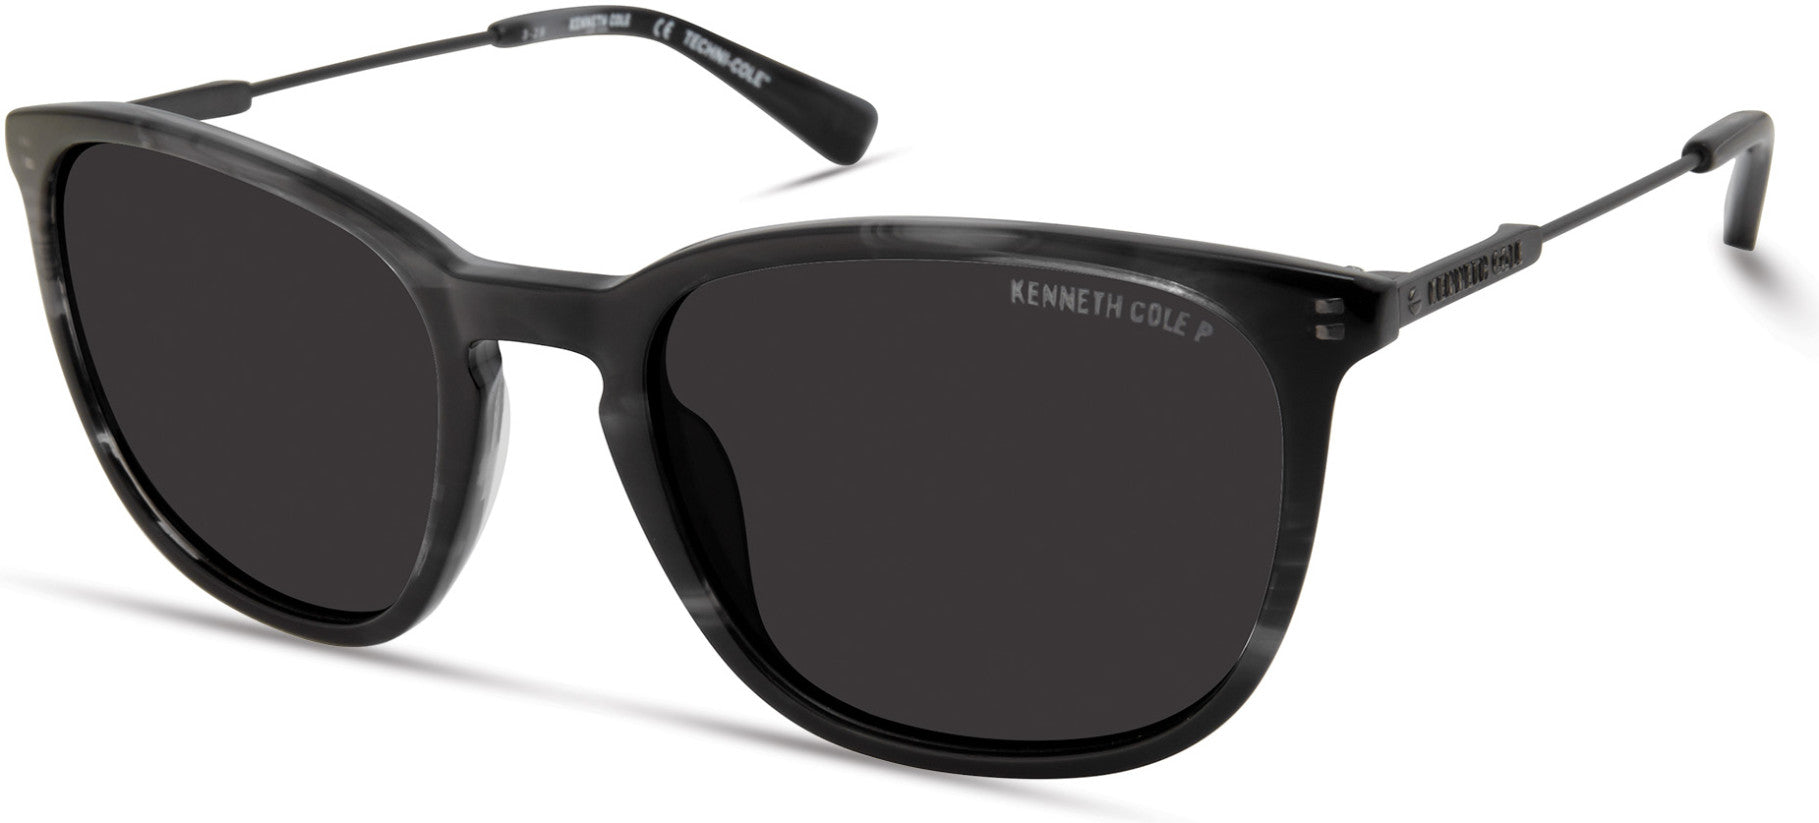 Kenneth Cole New York,Kenneth Cole Reaction KC7244 Square Sunglasses 05D-05D - Black / Smoke Polarized